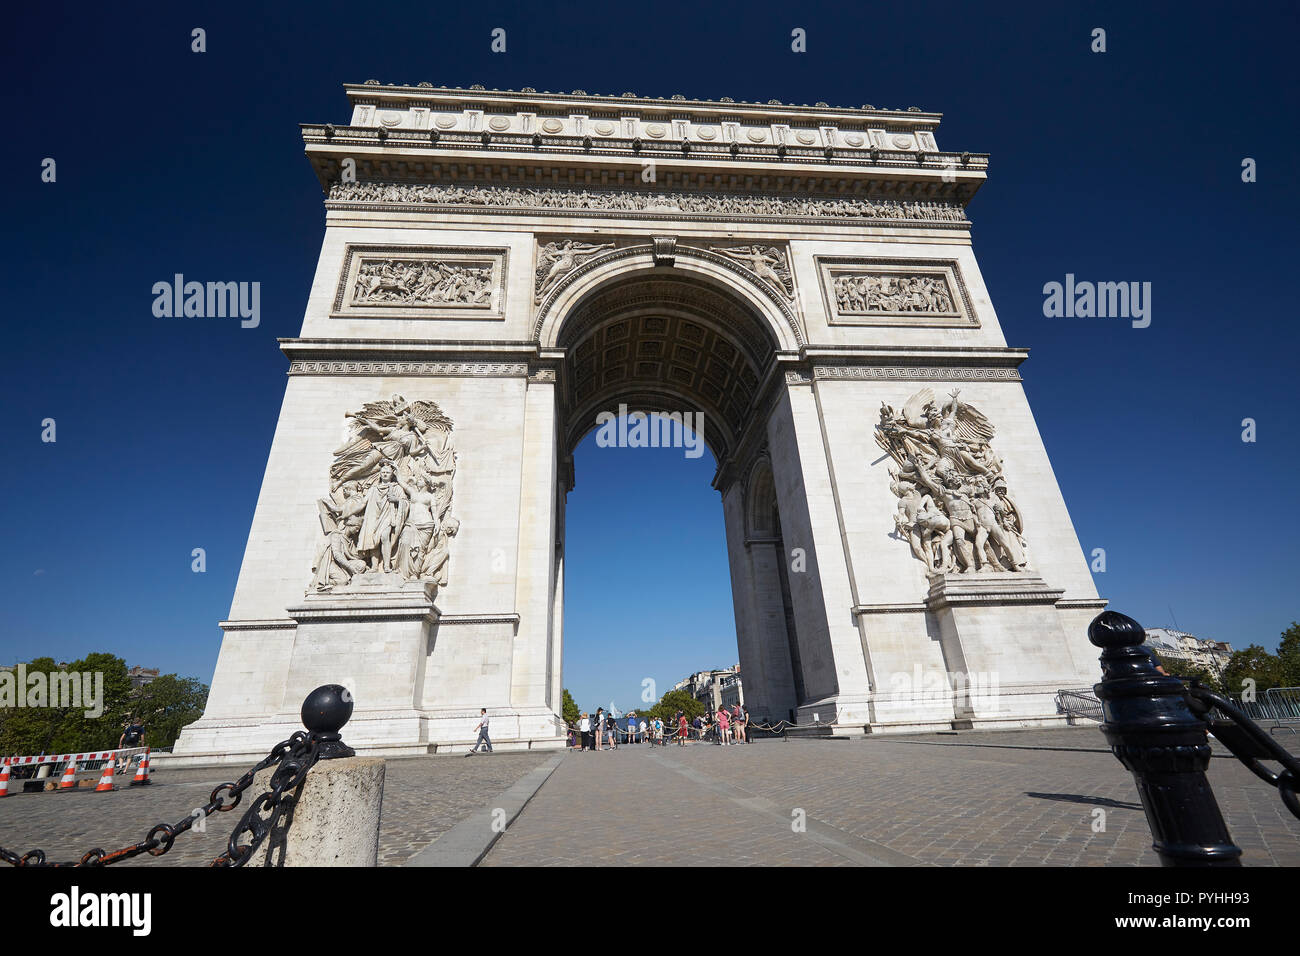 Paris, France - The Arc de Triomphe, landmark of the French capital at the Place Charles-de-Gaulle Stock Photo